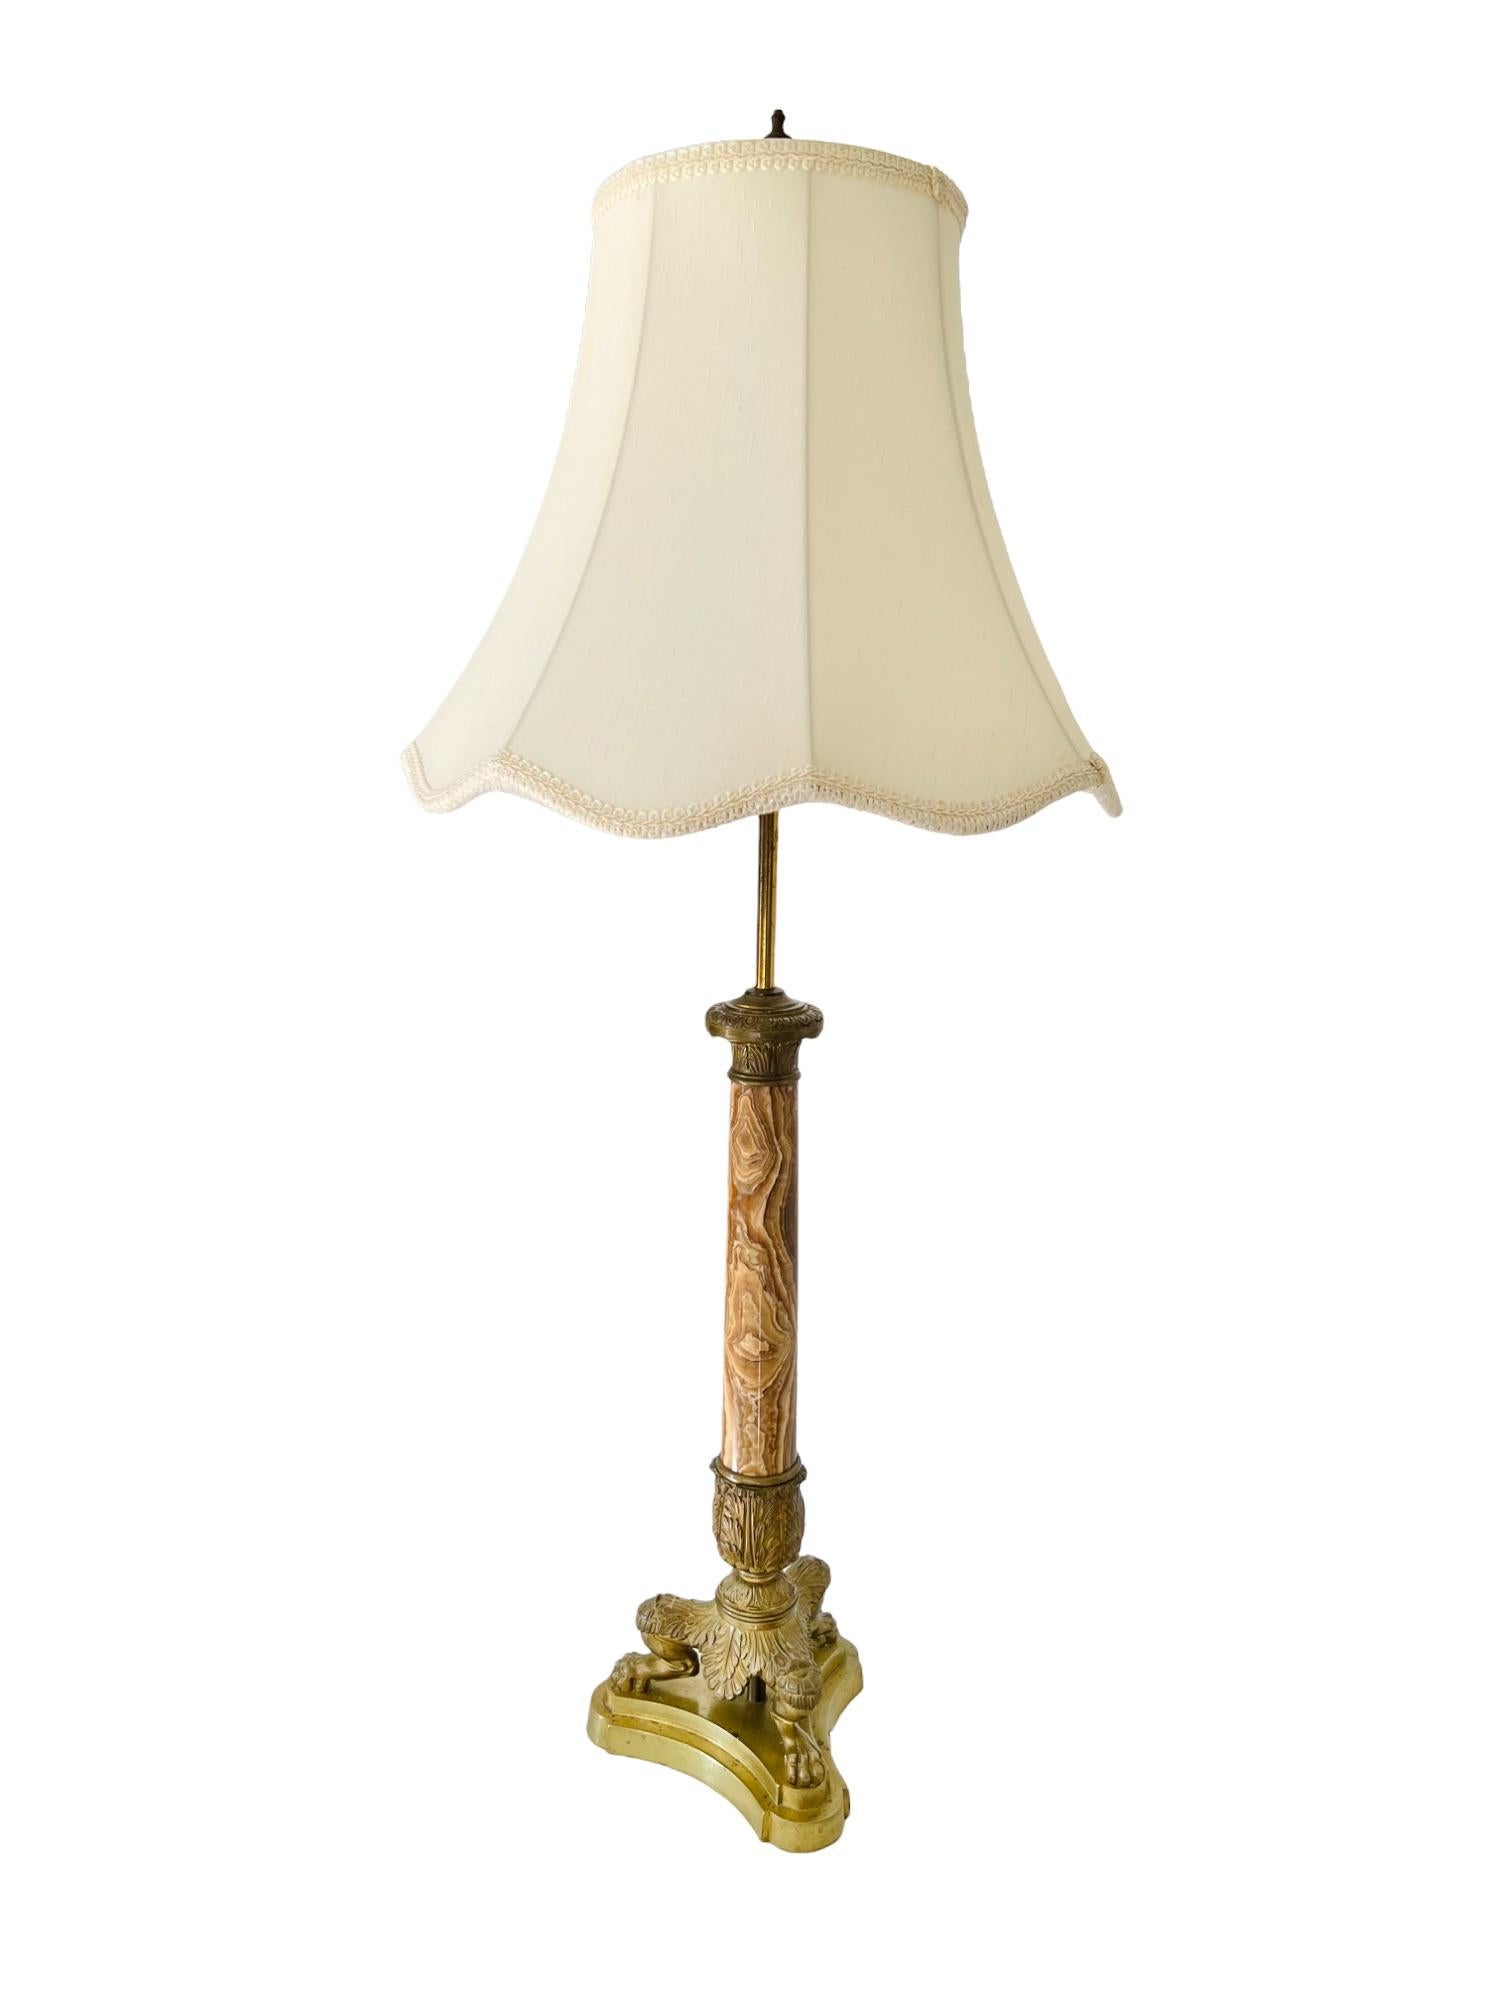 Cast 19th Century, French Empire Onyx & Brass Paw Footed Lamp For Sale